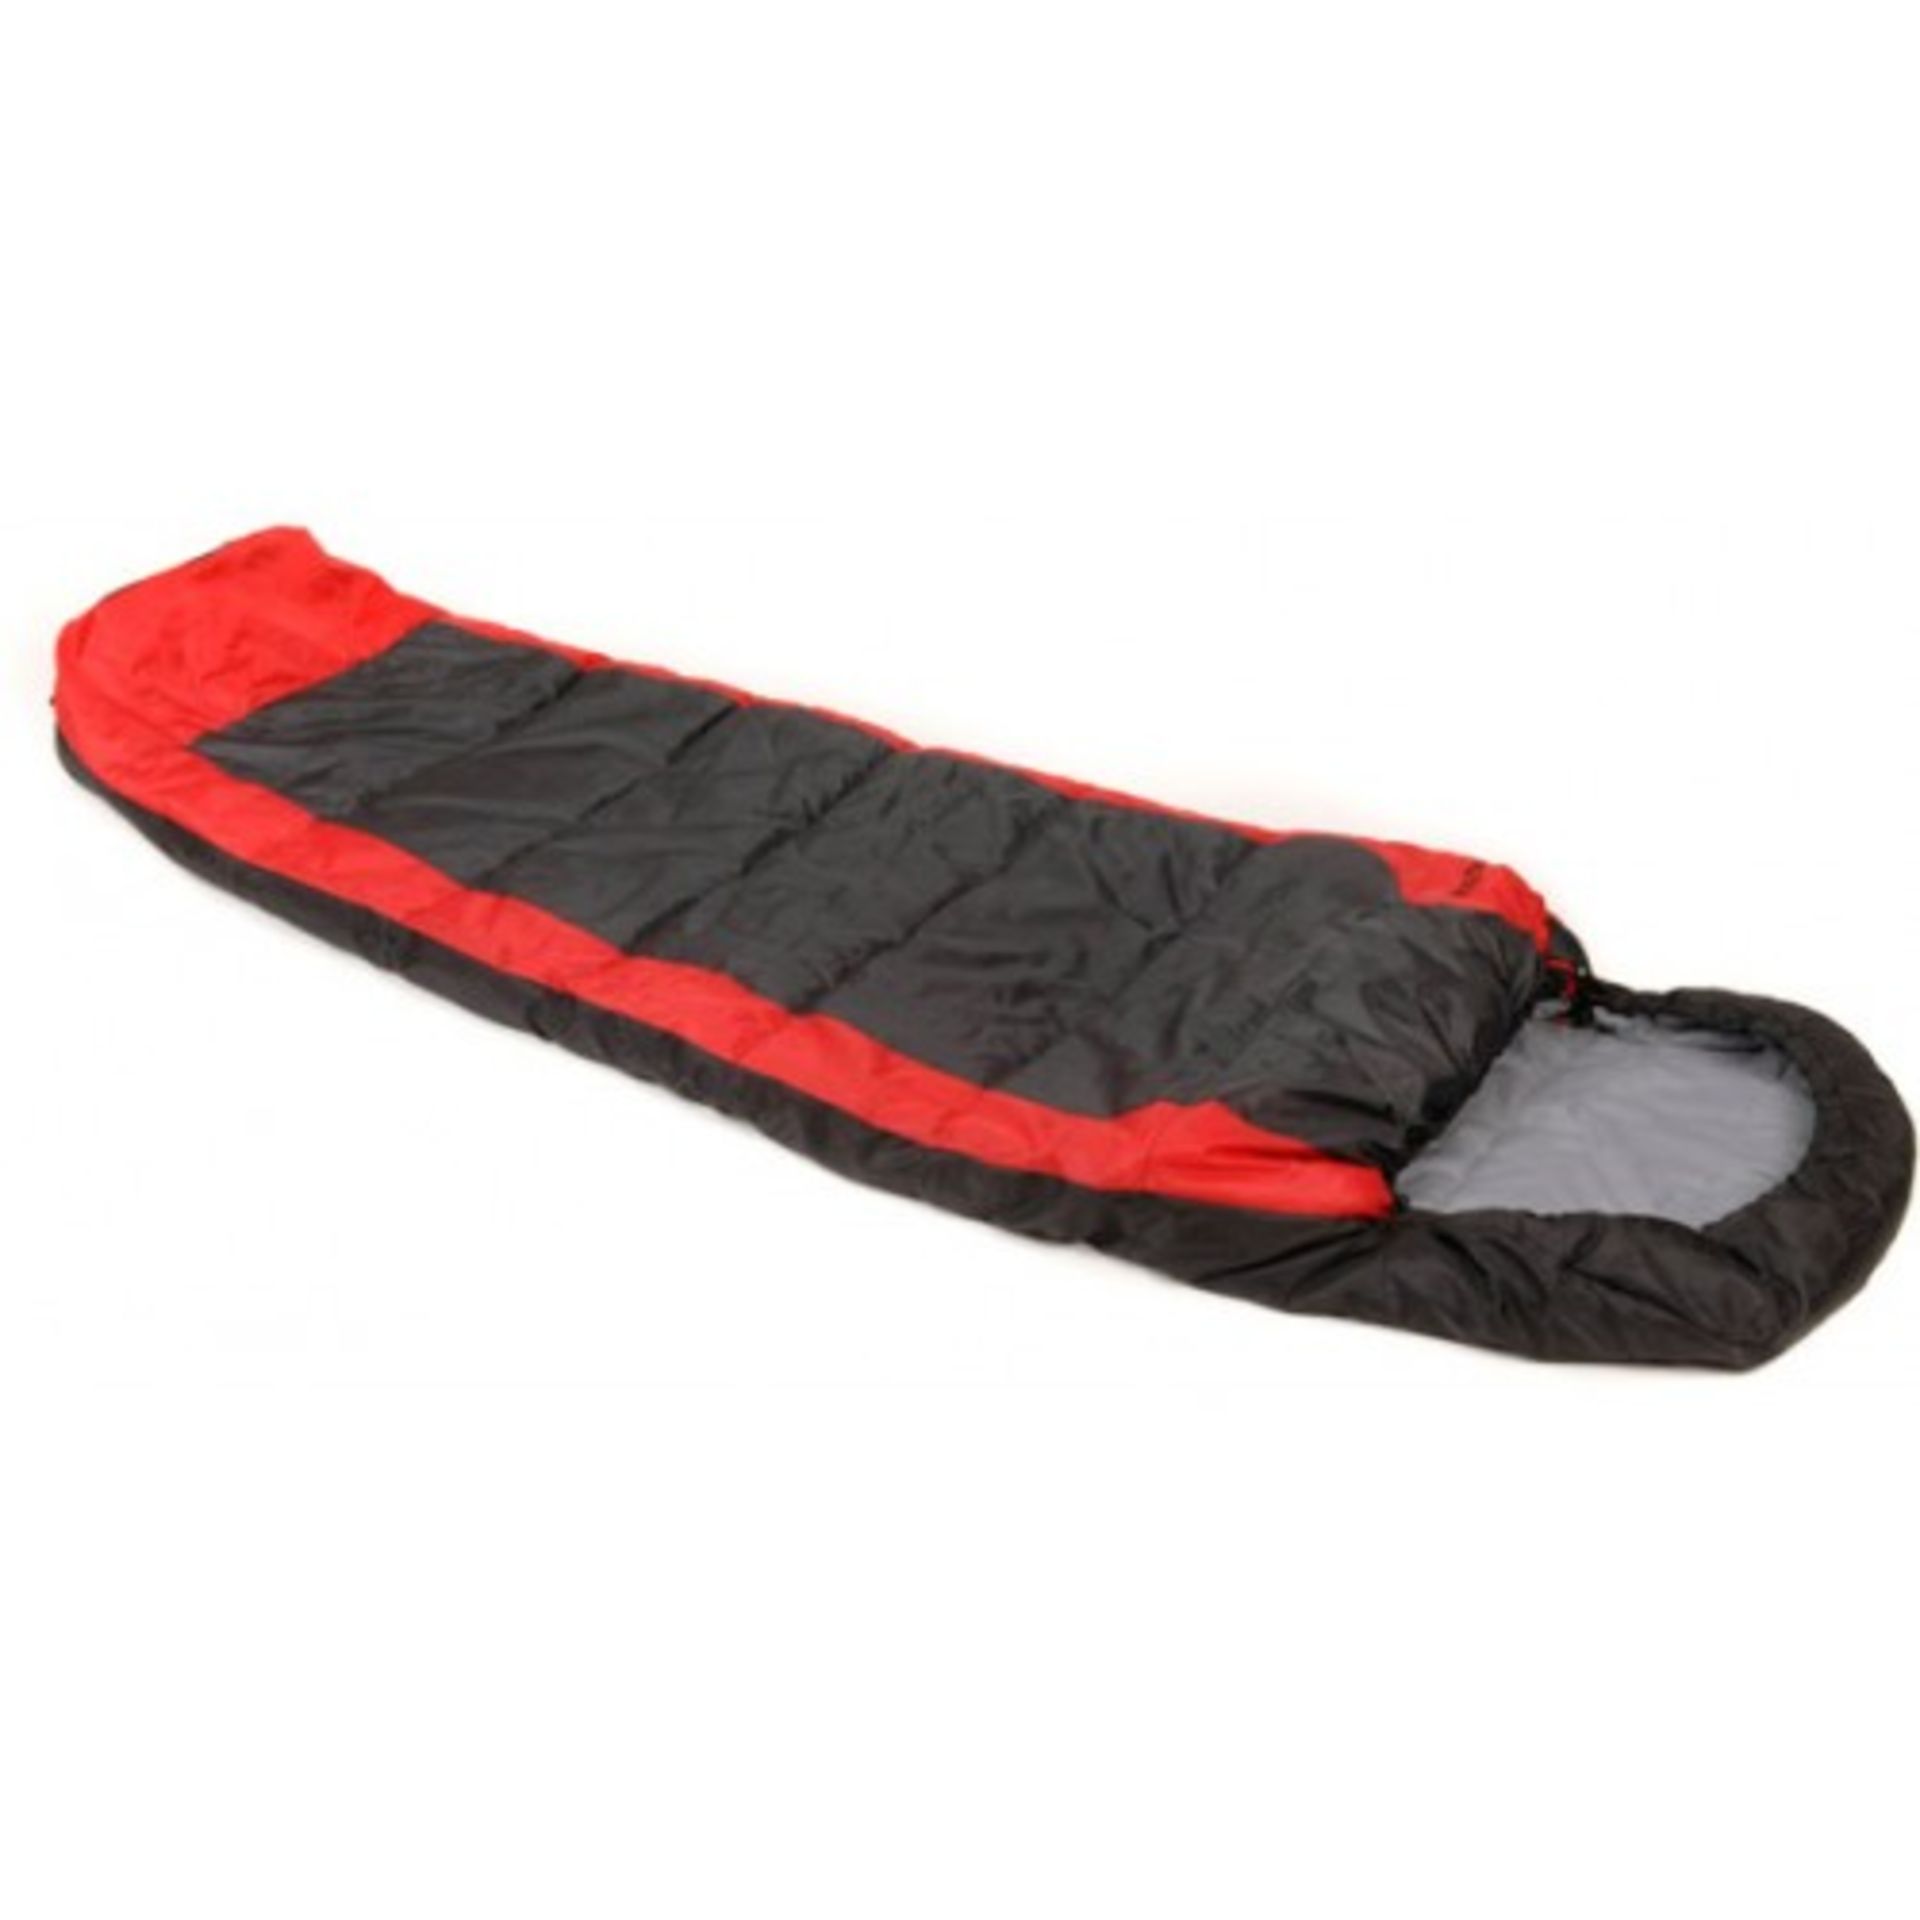 V Brand New Sleeping Bag With Water And Soil Resistant Coating - Can Be Joined To A Second Bag -